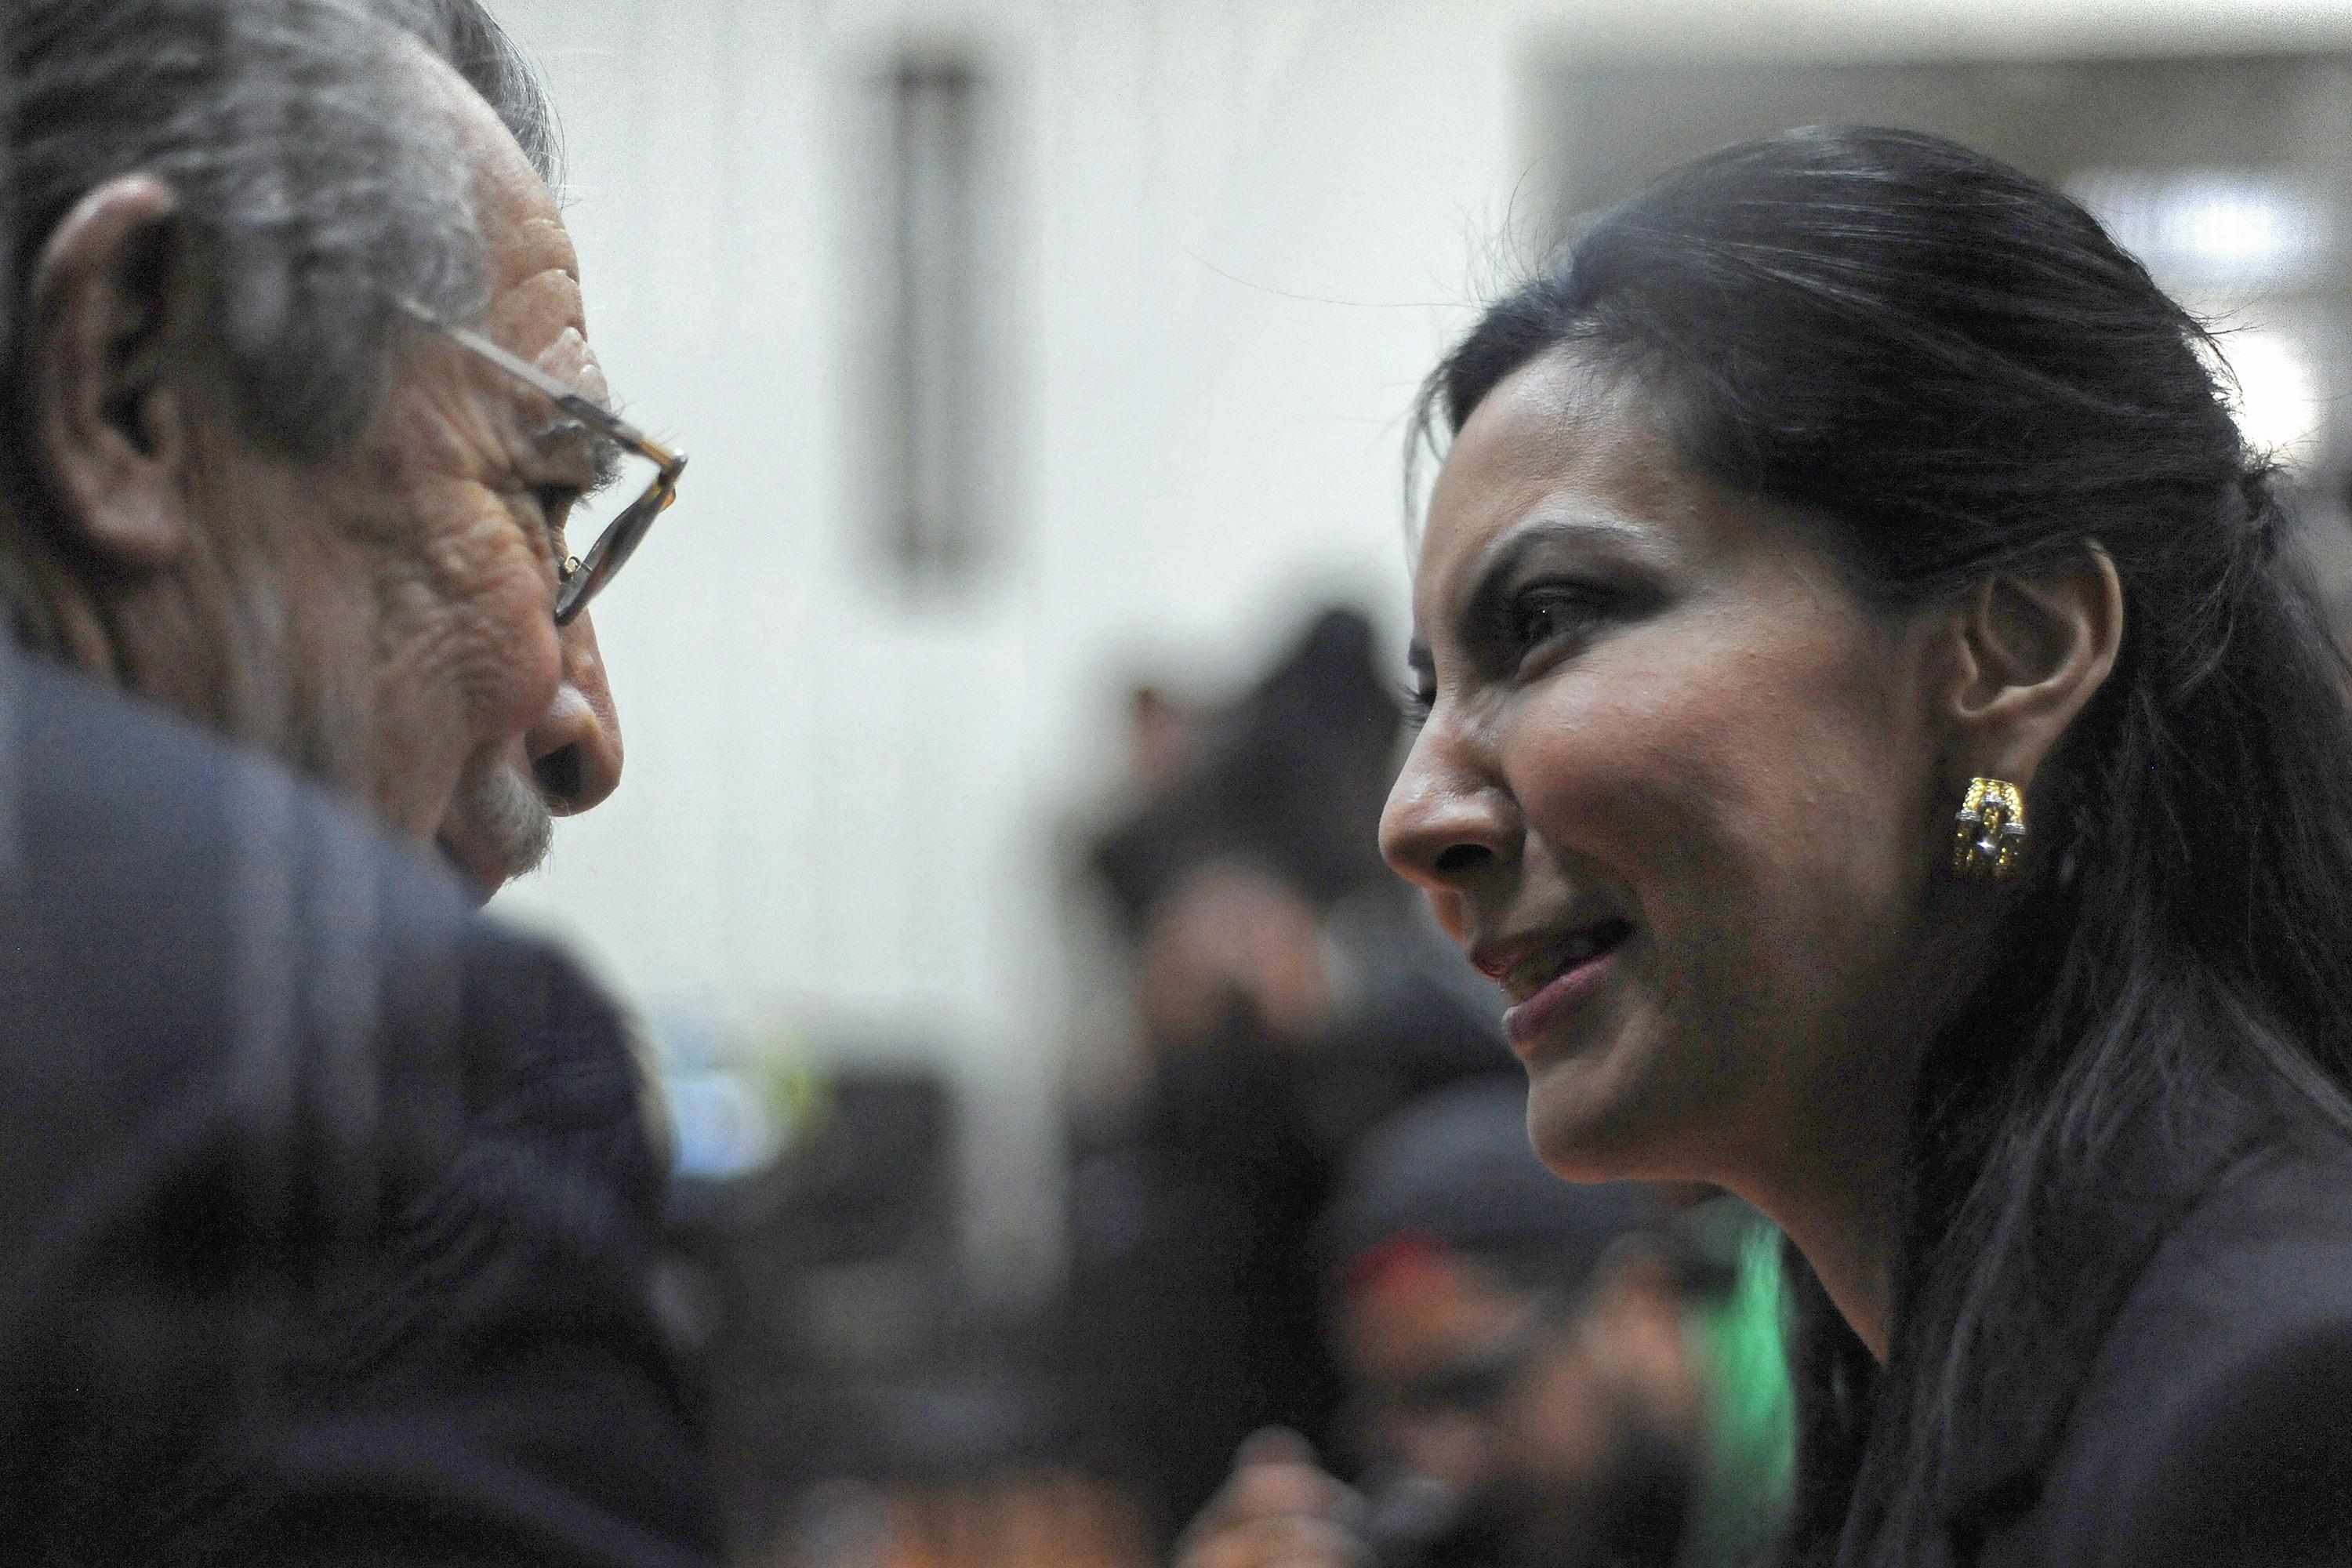 Guatemala’s former de facto president (1982-1983) and retired general, José Efraín Rios Montt, speaks with his daughter Zury Rios during a court hearing in Guatemala City on January 23, 2013, when prosecutors requested that Ríos Montt and retired general José Rodríguez be tried for genocide. Photo: Johan Ordónez/AFP